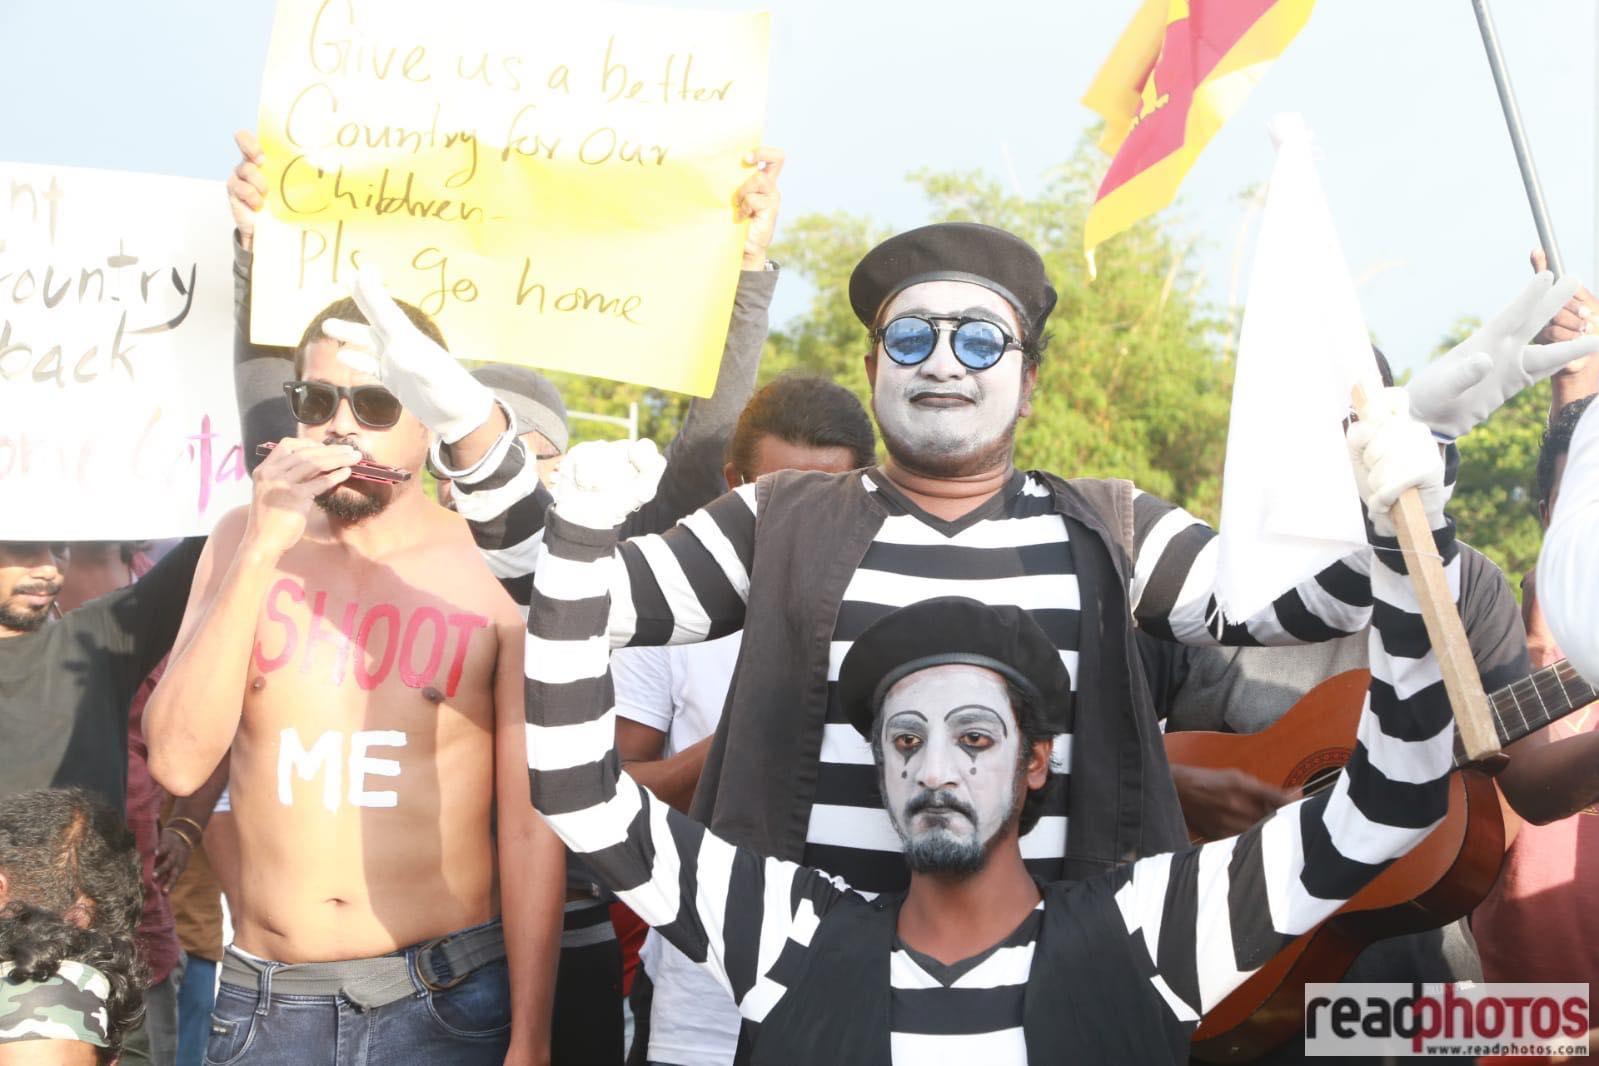 Sri Lankans protests against the government - 07.04.2022 - Read Photos